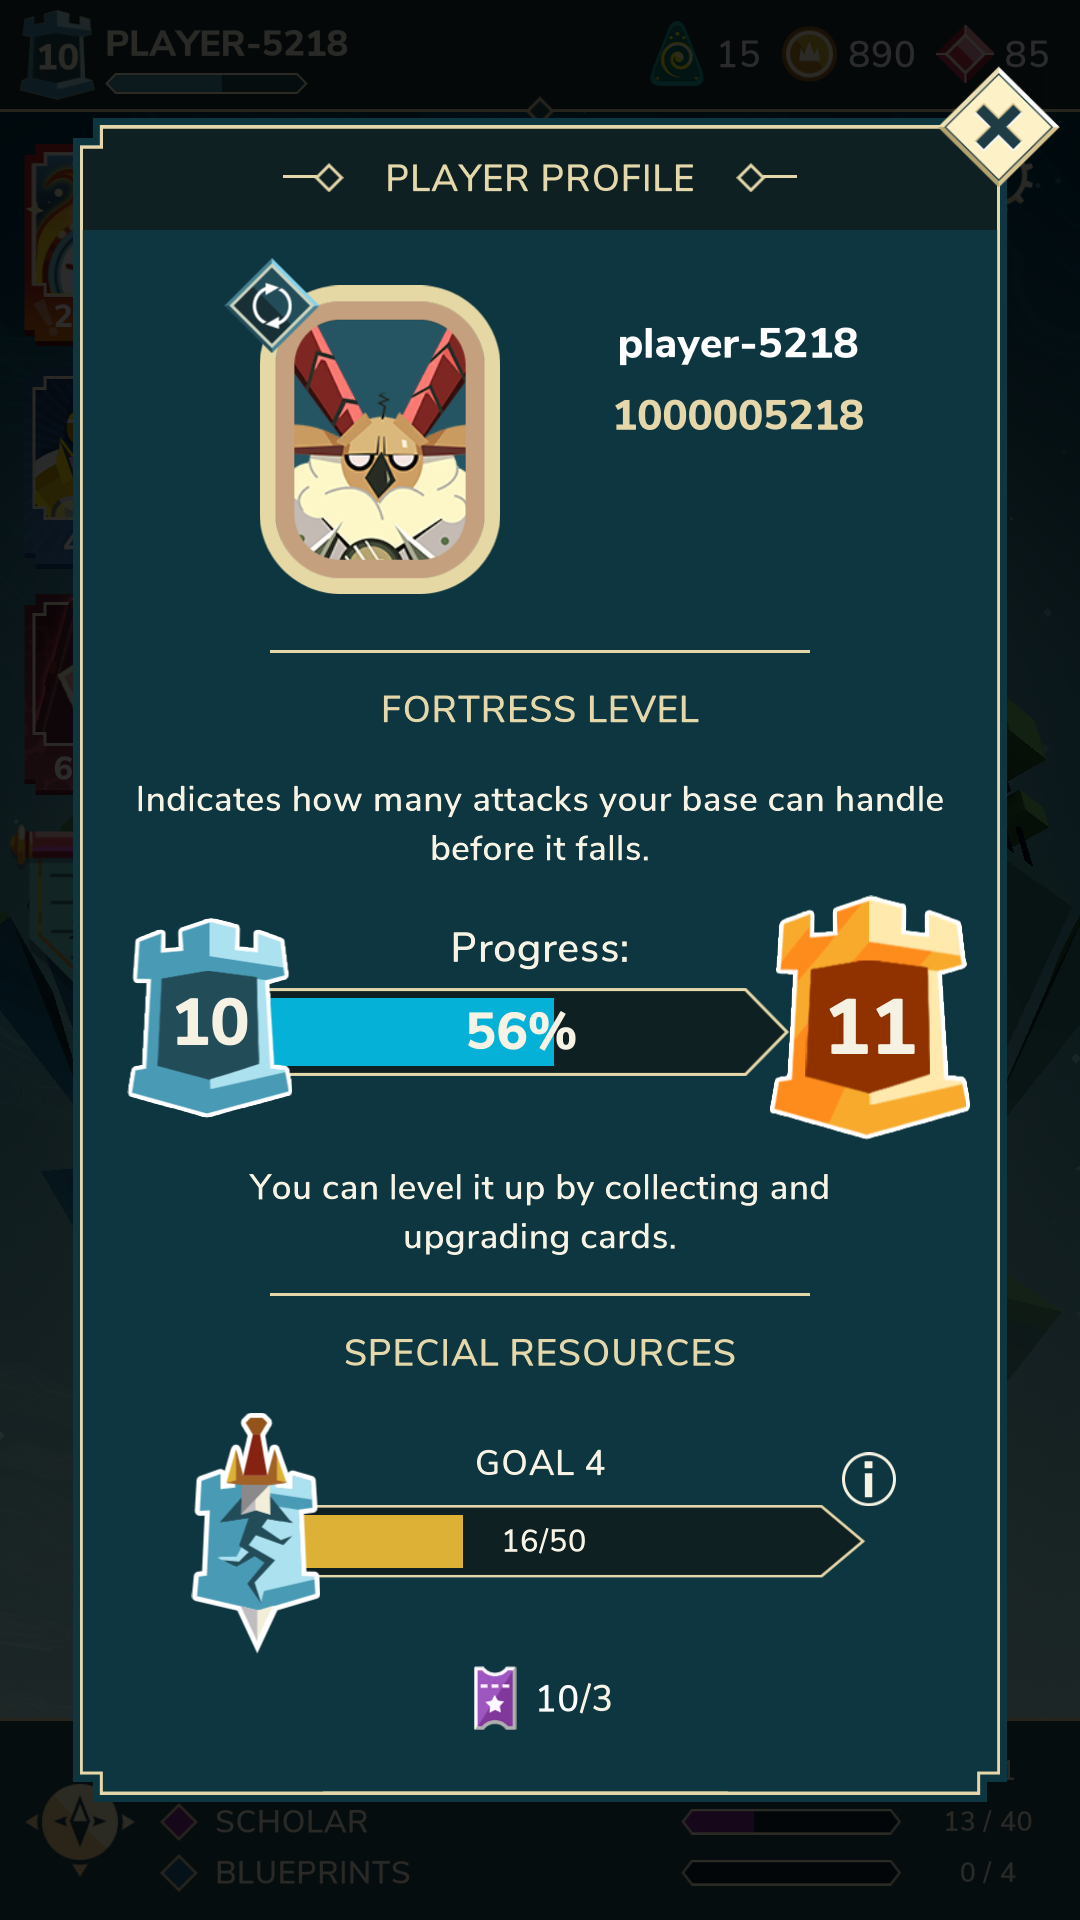 Player’s profile popup displaying the current special resources progress bar